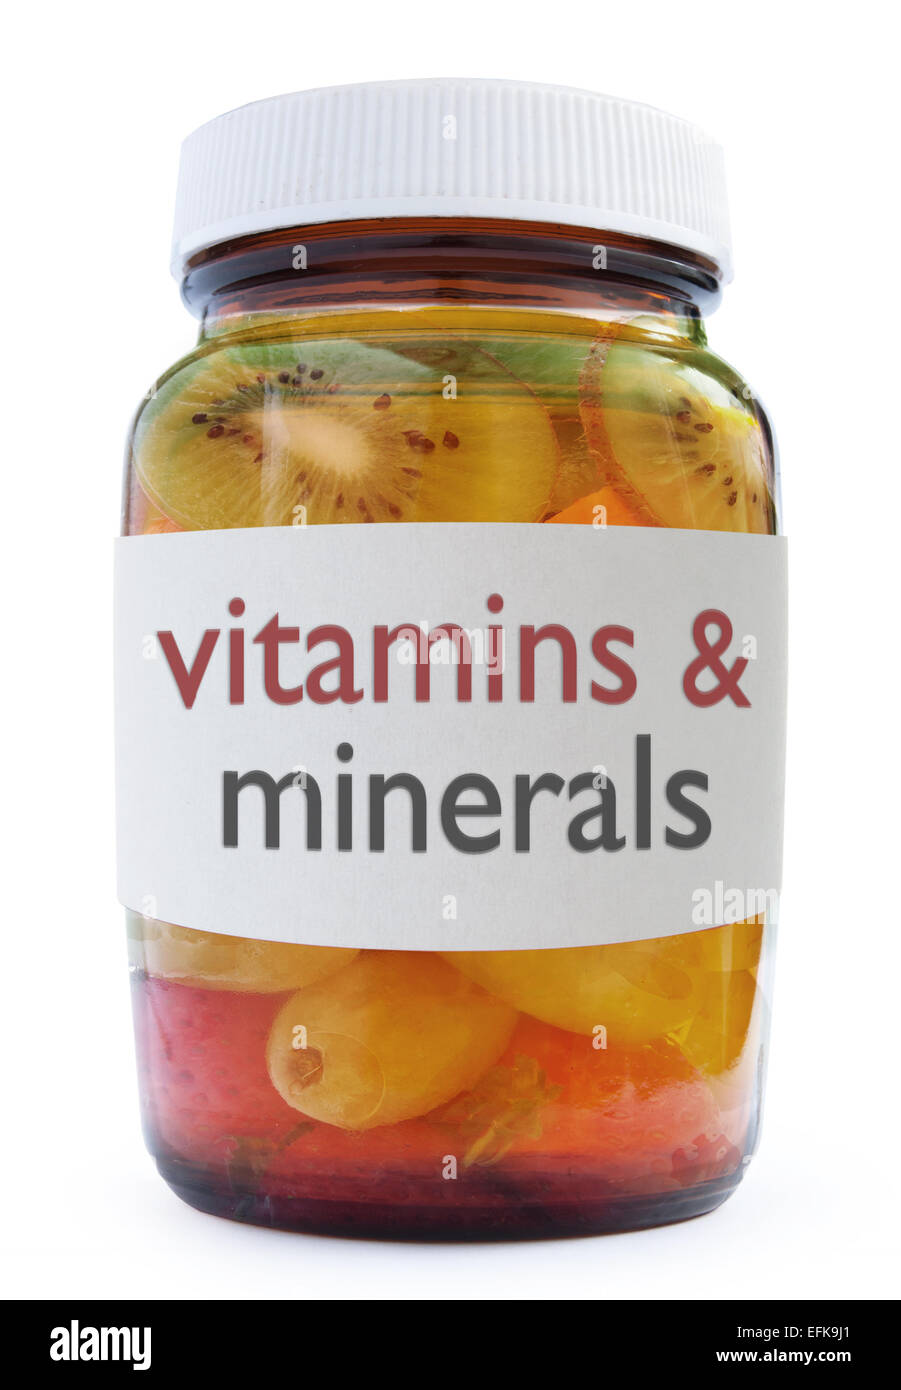 Vitamins and minerals medicine bottle packed with fruit over a white background Stock Photo